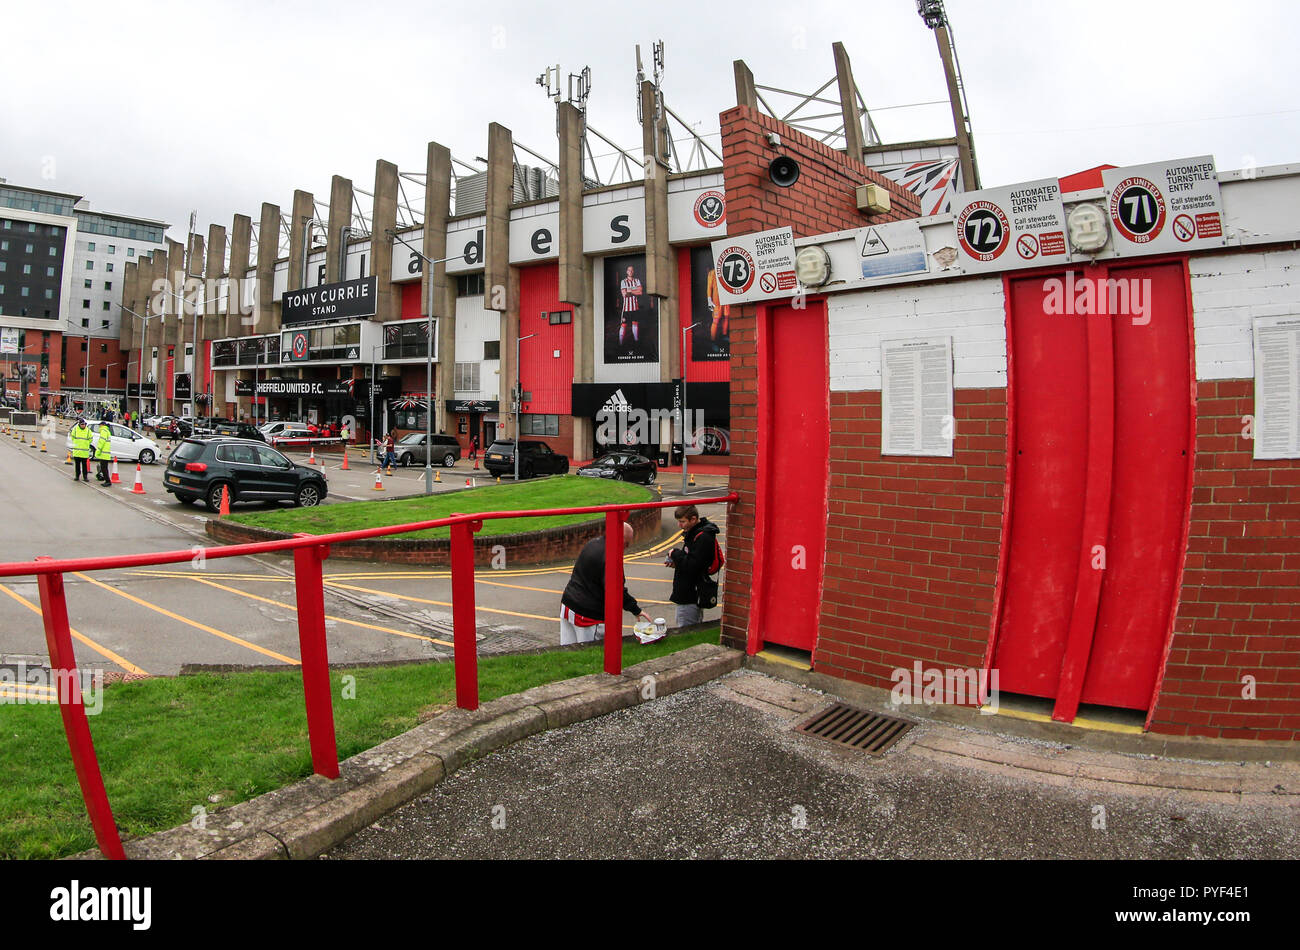 27th October 2018, Bramall Lane, Sheffield, England; Sky Bet Championship, Sheffield United v Wigan ; Exterior view of Bramall Lane, home of Sheffield United FC Credit: Conor Molloy/News Images  English Football League images are subject to DataCo Licence Stock Photo